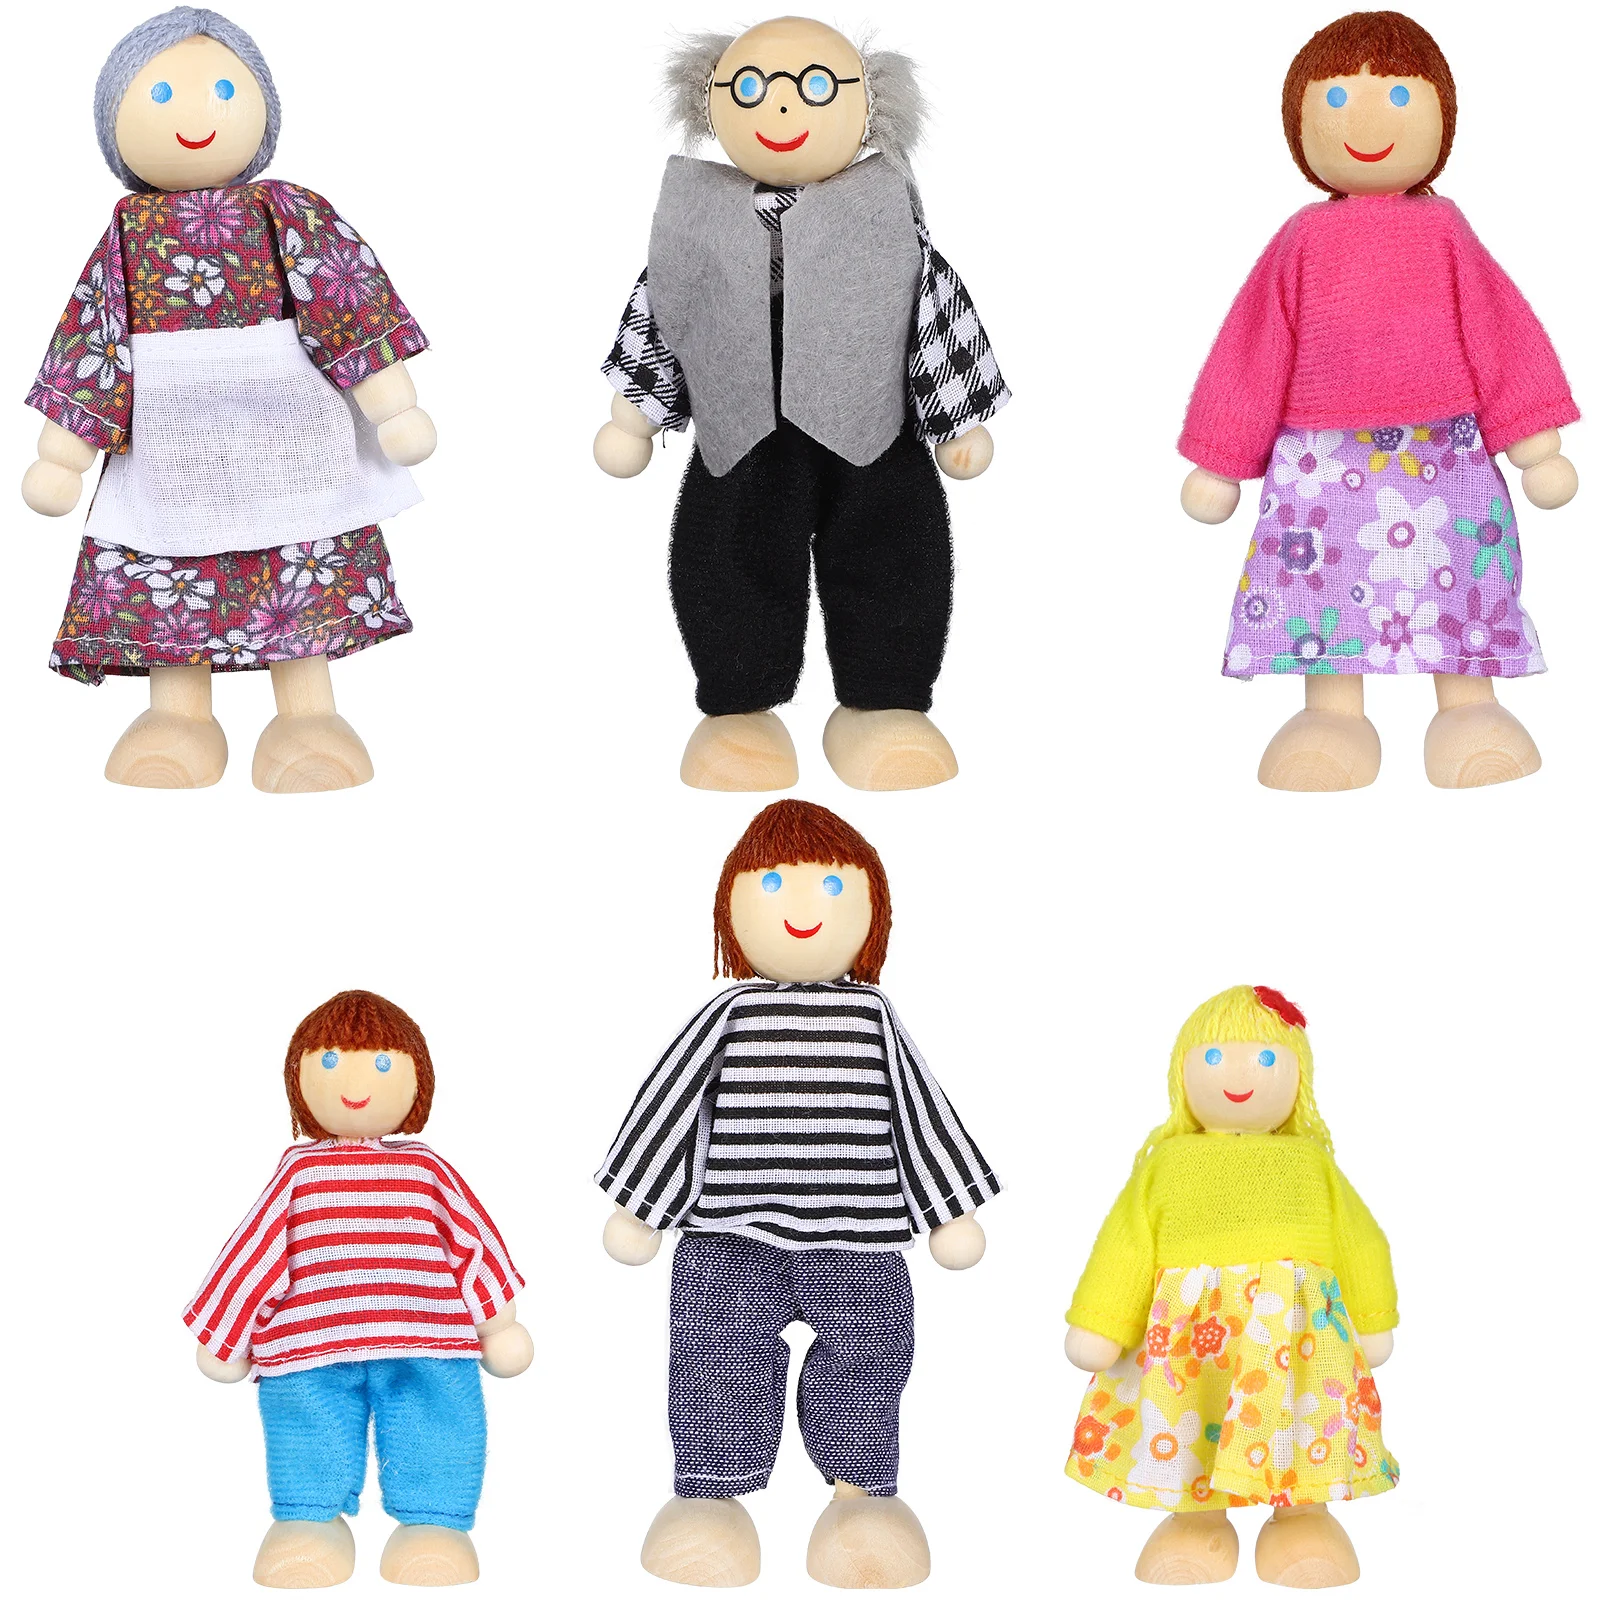 

6/7pcs Family Member Dolls Wooden Puppet Toys Kids Pretend Play Toys Doll House People Set Storytelling Toy Birthday Gift